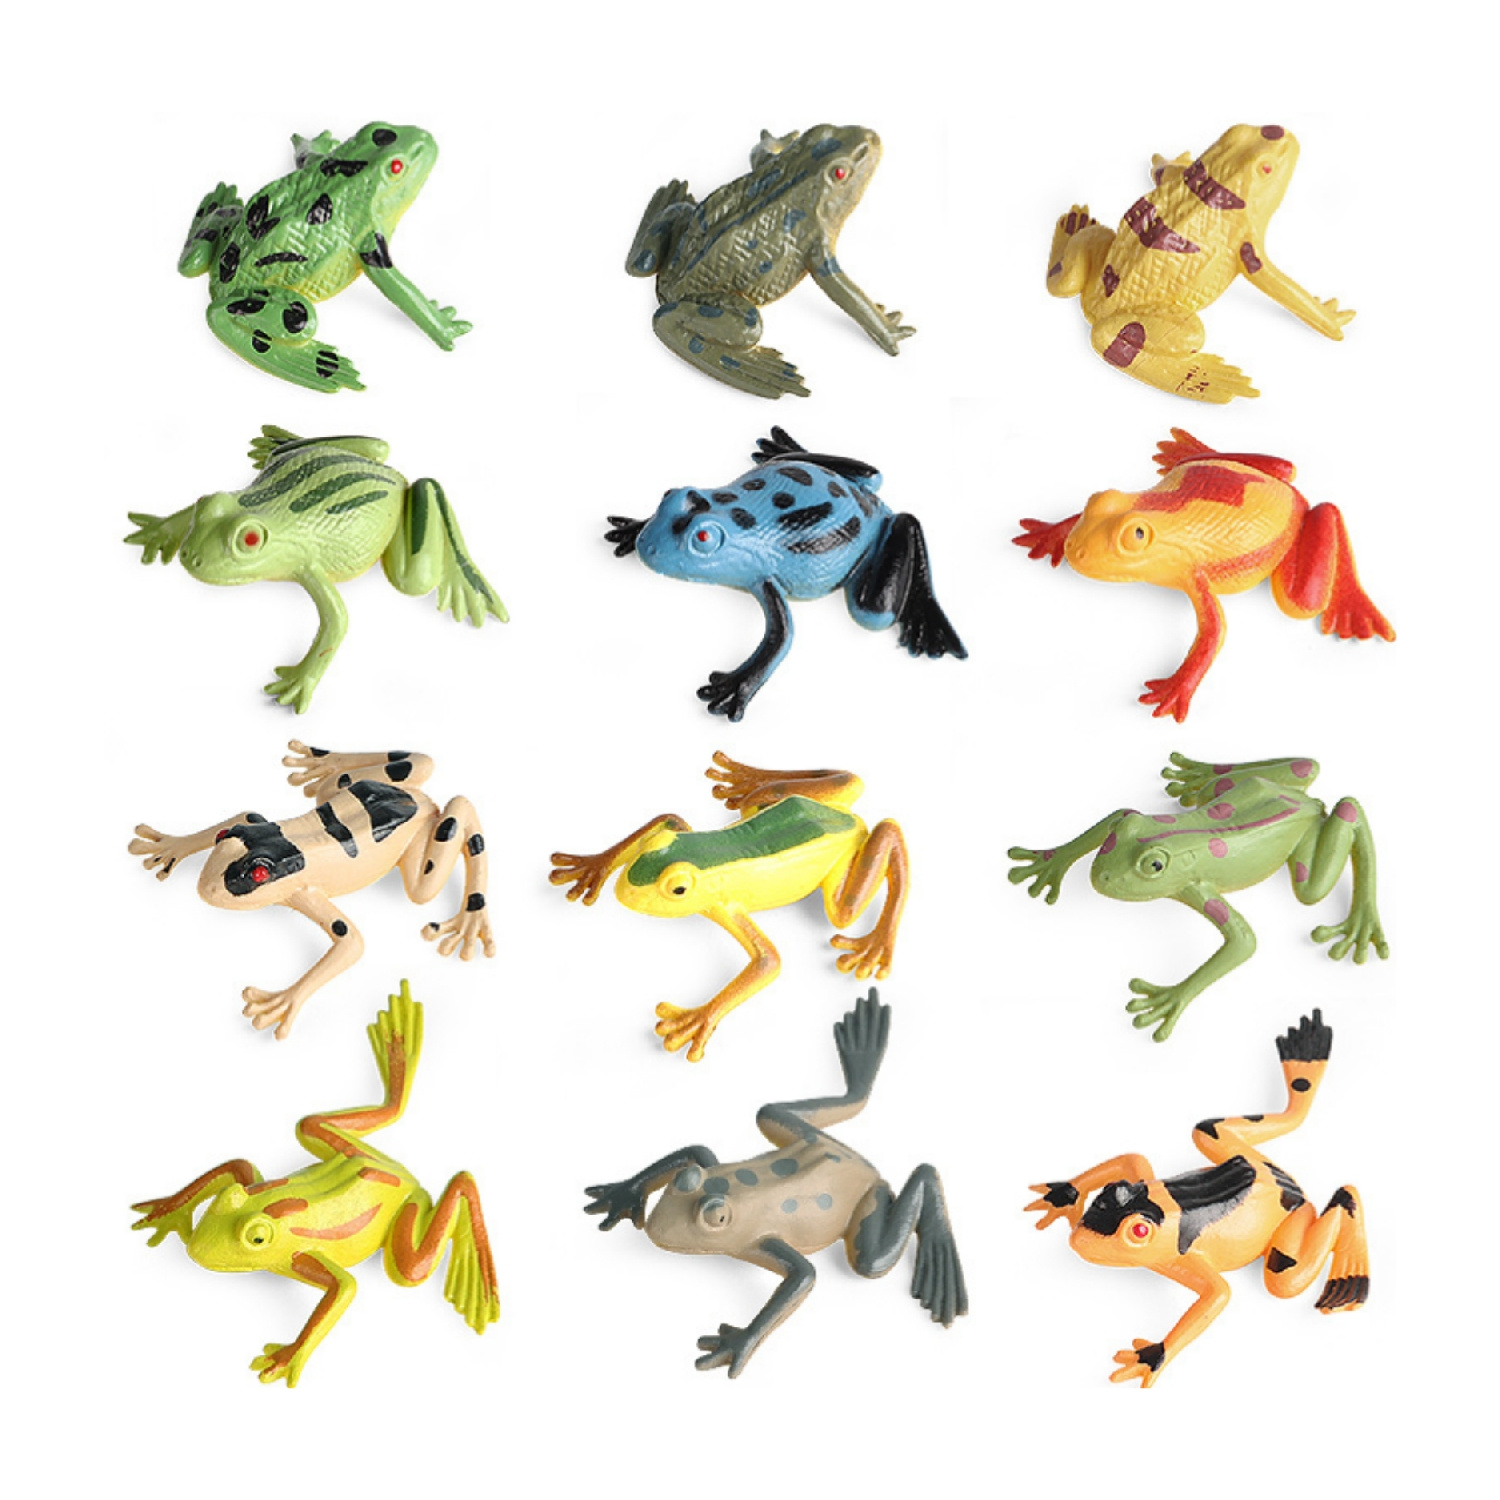 Fun Central (AZ916) Assorted Frog Figure, Toy Frog Gift, Frog Toys for Kids